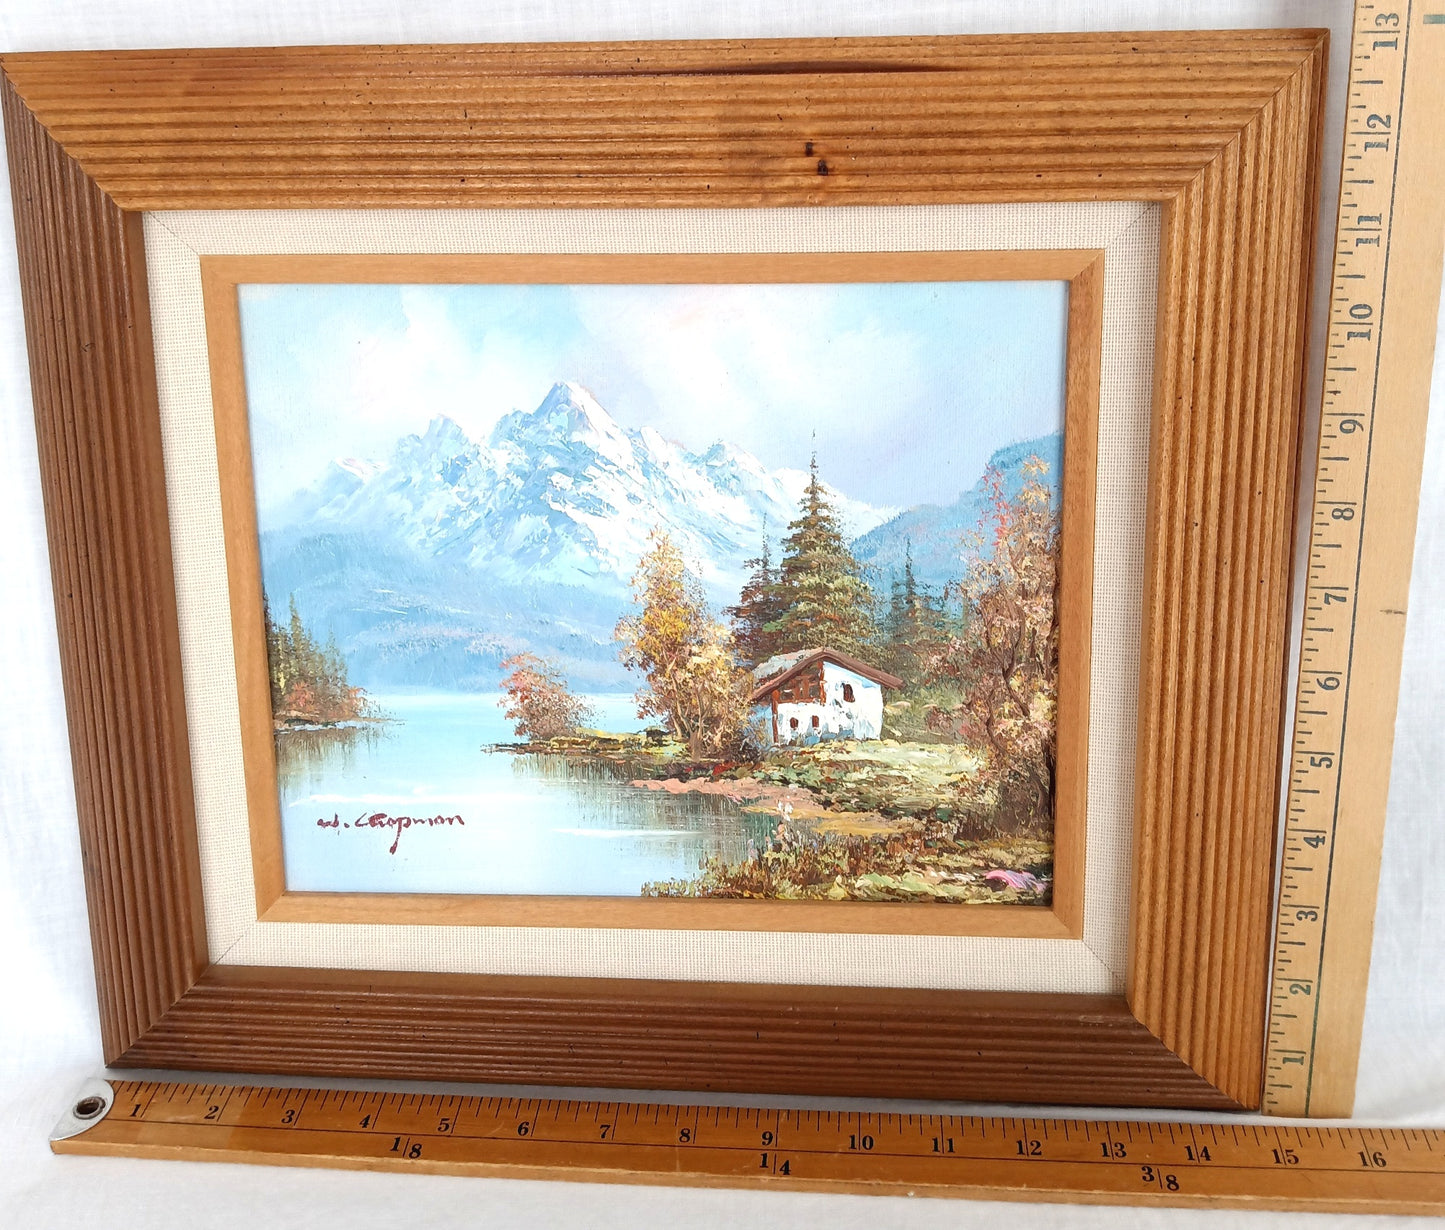 Vintage Oil Painting on Canvas Autumn Fall Mountain Scene Lake Landscape Wooden Frame Artwork Painting Wall Art Signed W. Chapman